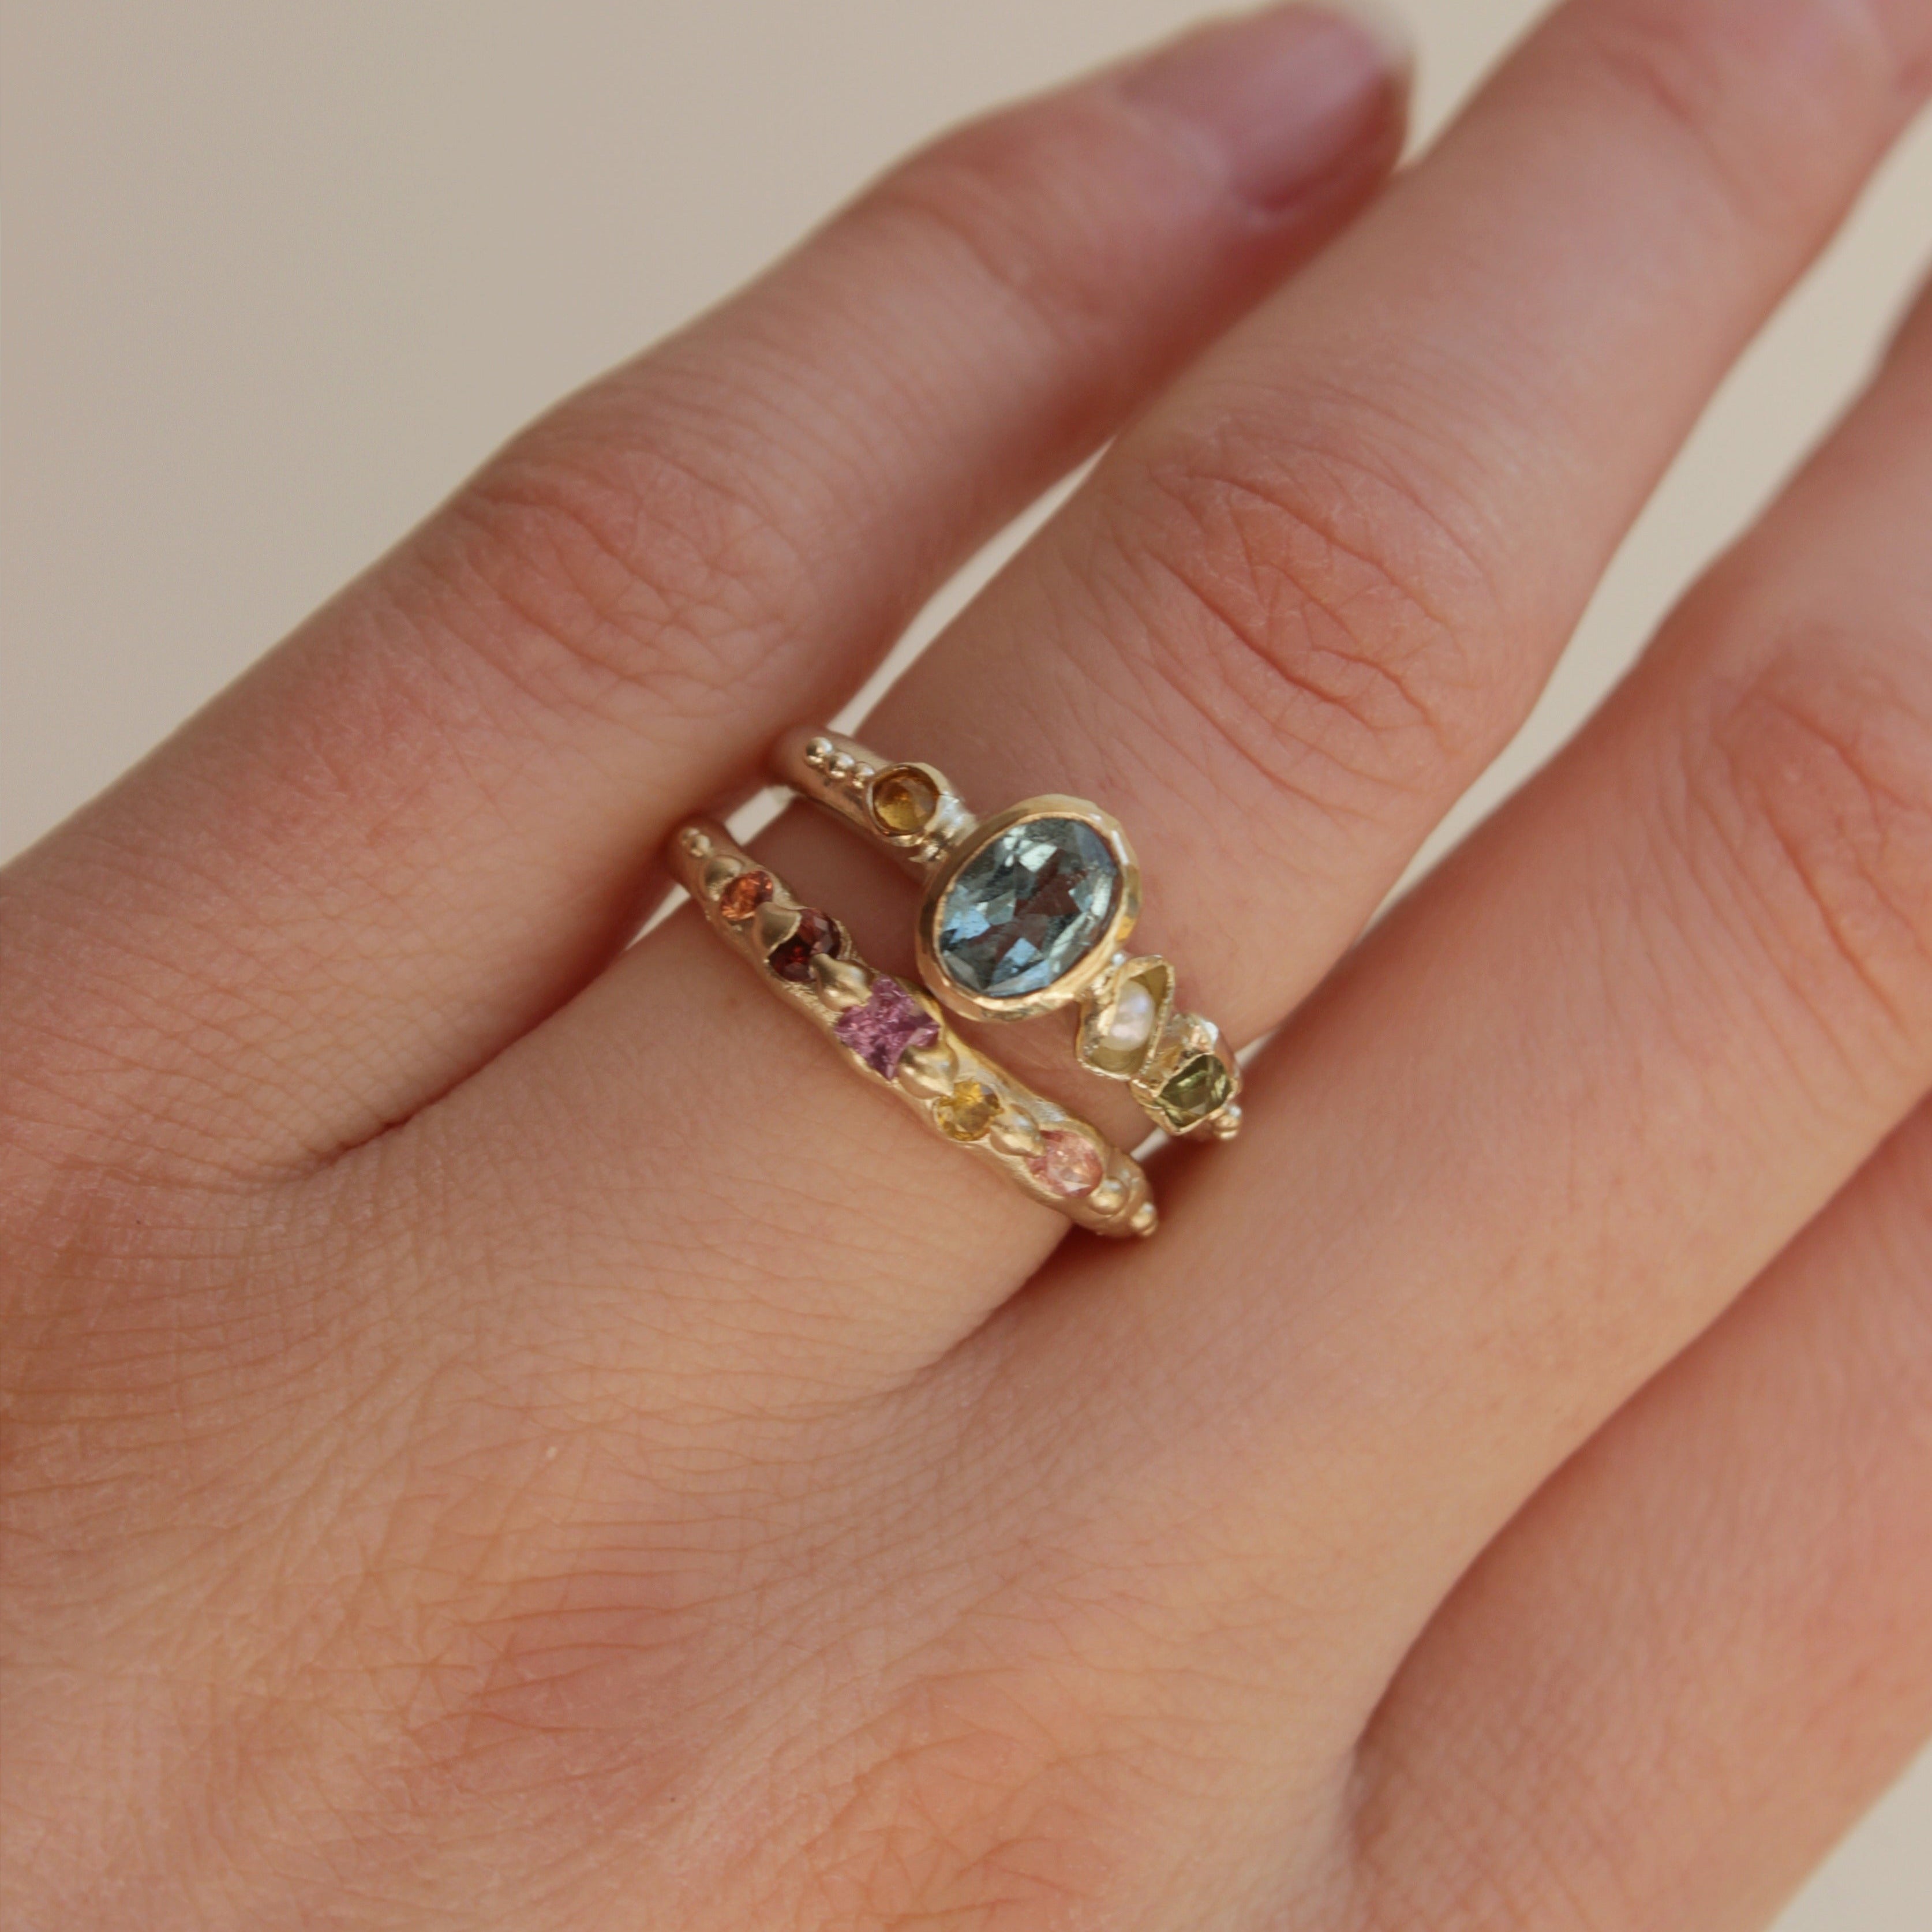 Bespoke, hand crafted 9ct gold alternative engagement ring. The ring features a vibrant oval Aquamarine, a pearl and sapphires. Handcrafted in Frome by Josie Mitchell Jewellery for the alternative bride and ocean lover. Worn with the Sapphire wedding band in 9ct gold.